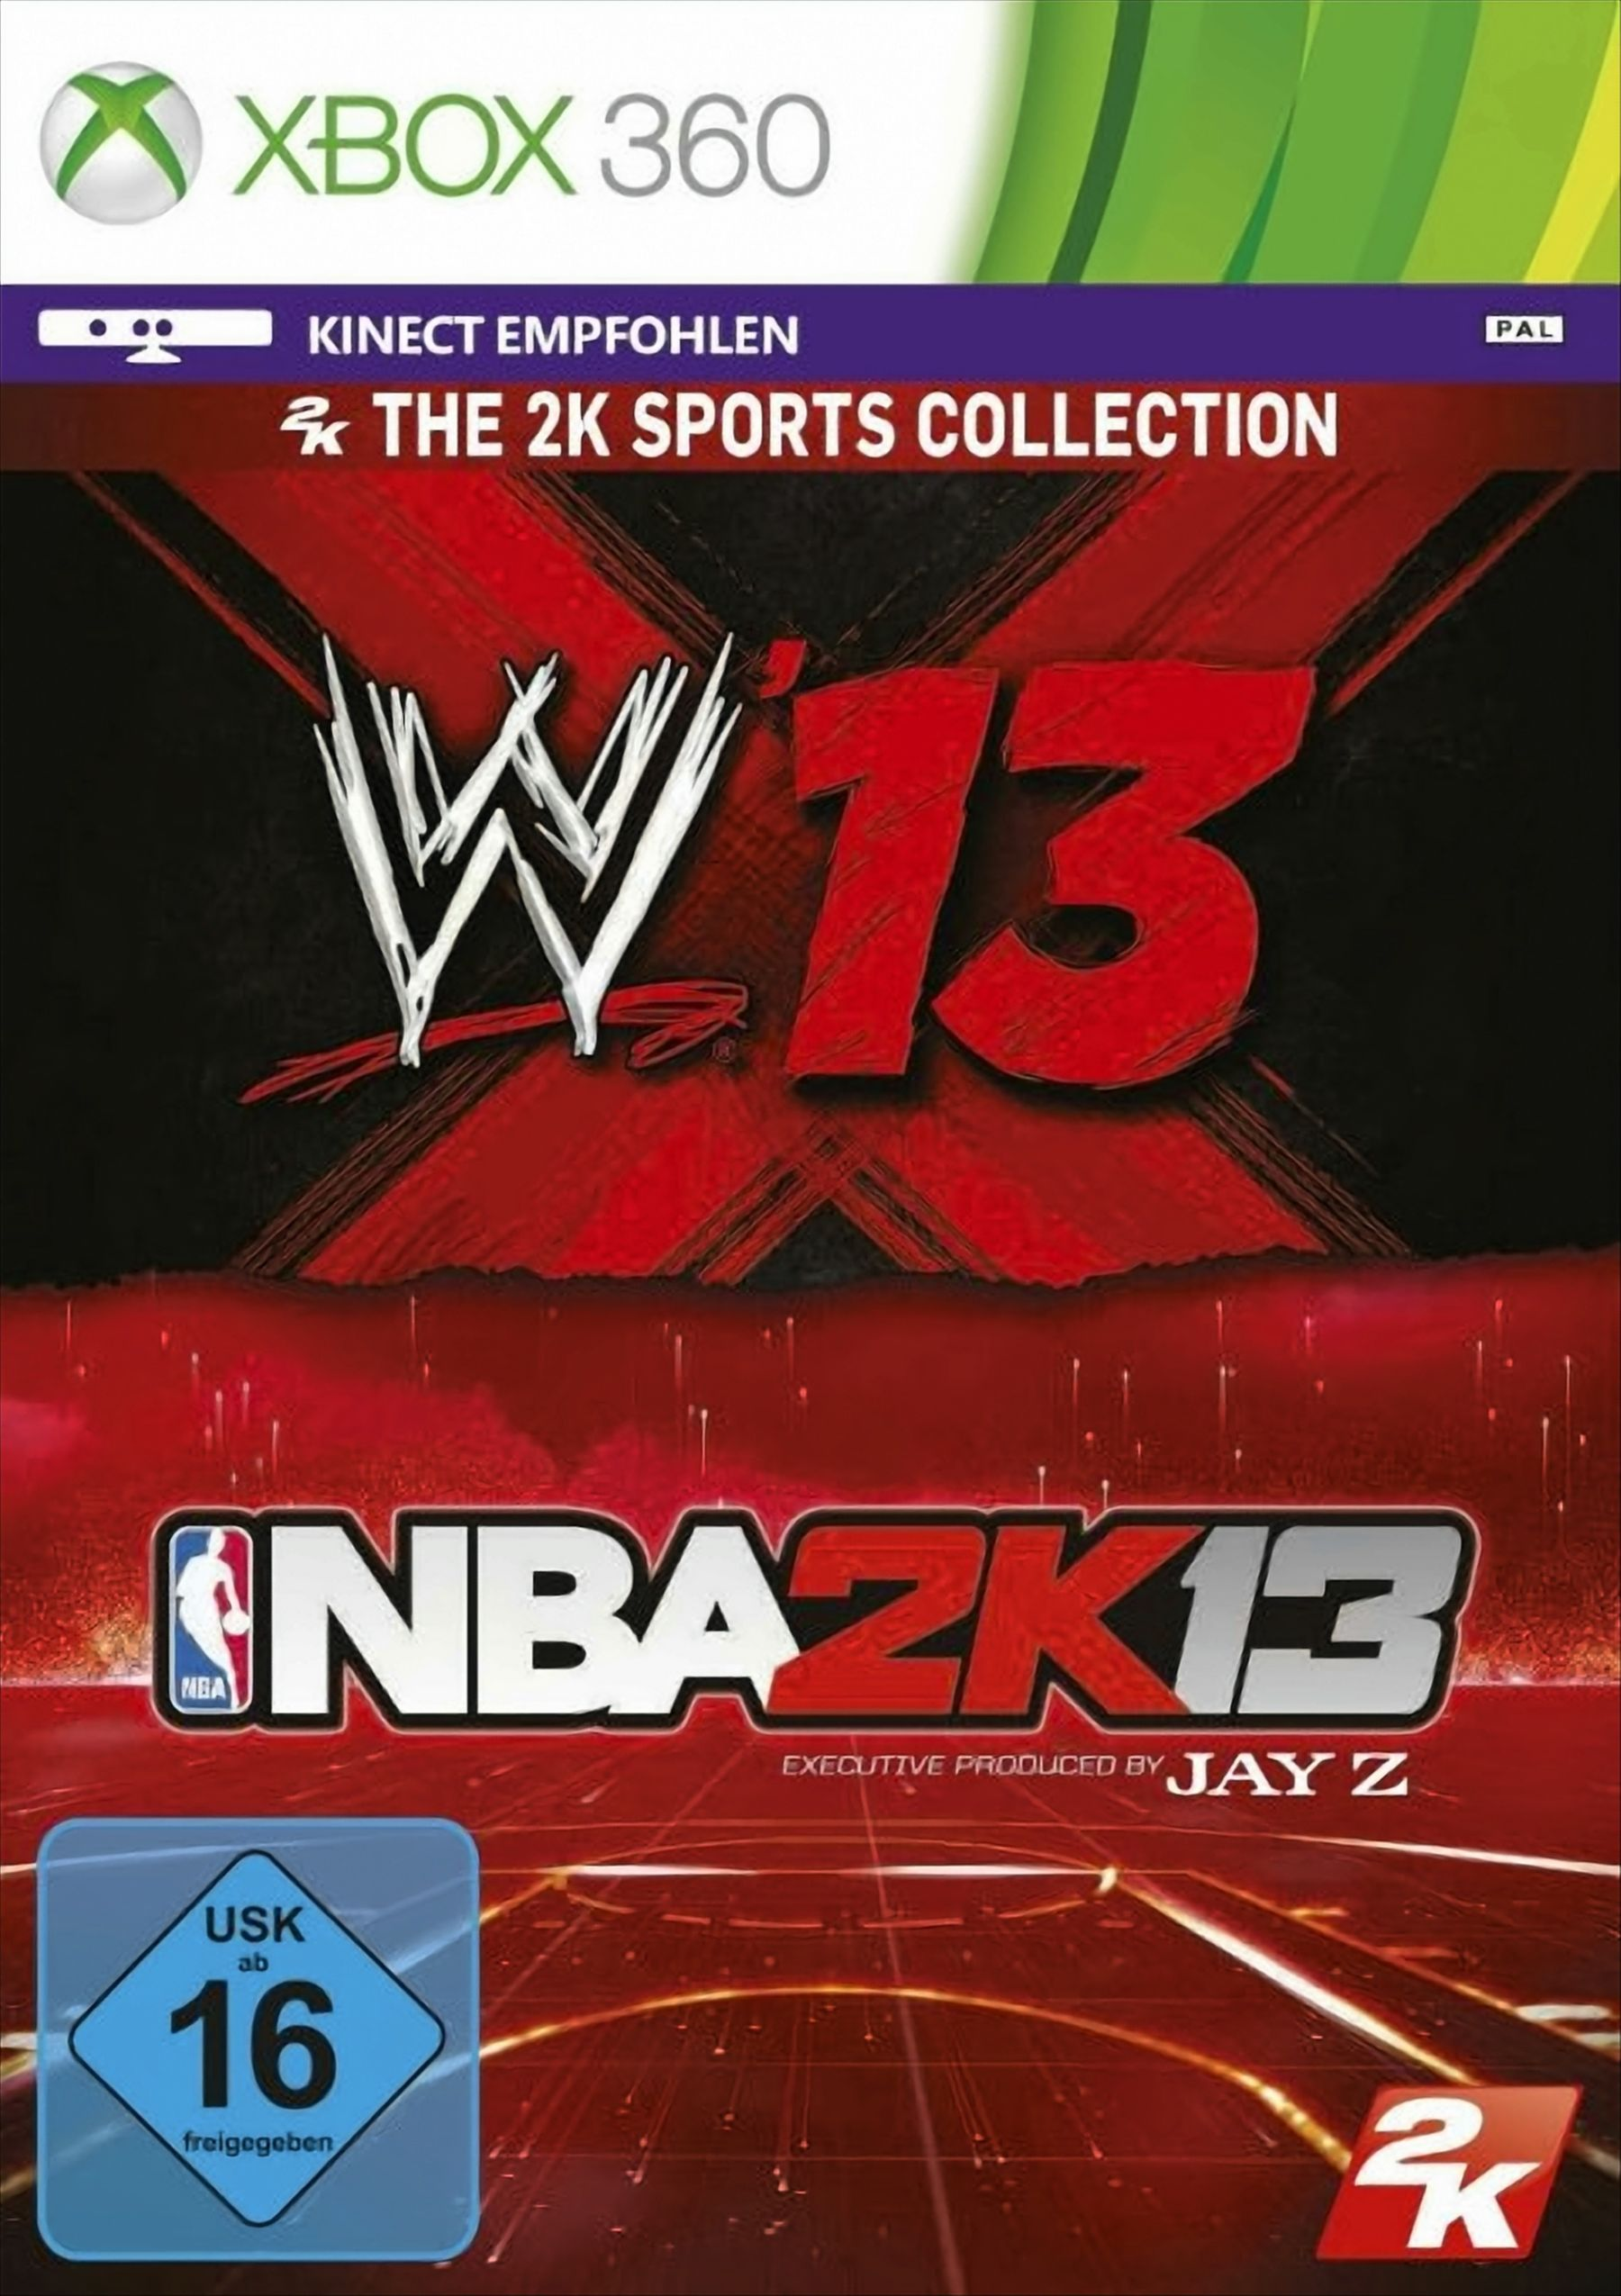 Collection 2K13 13) [Xbox The 360] / Sports WWE - (NBA 2K